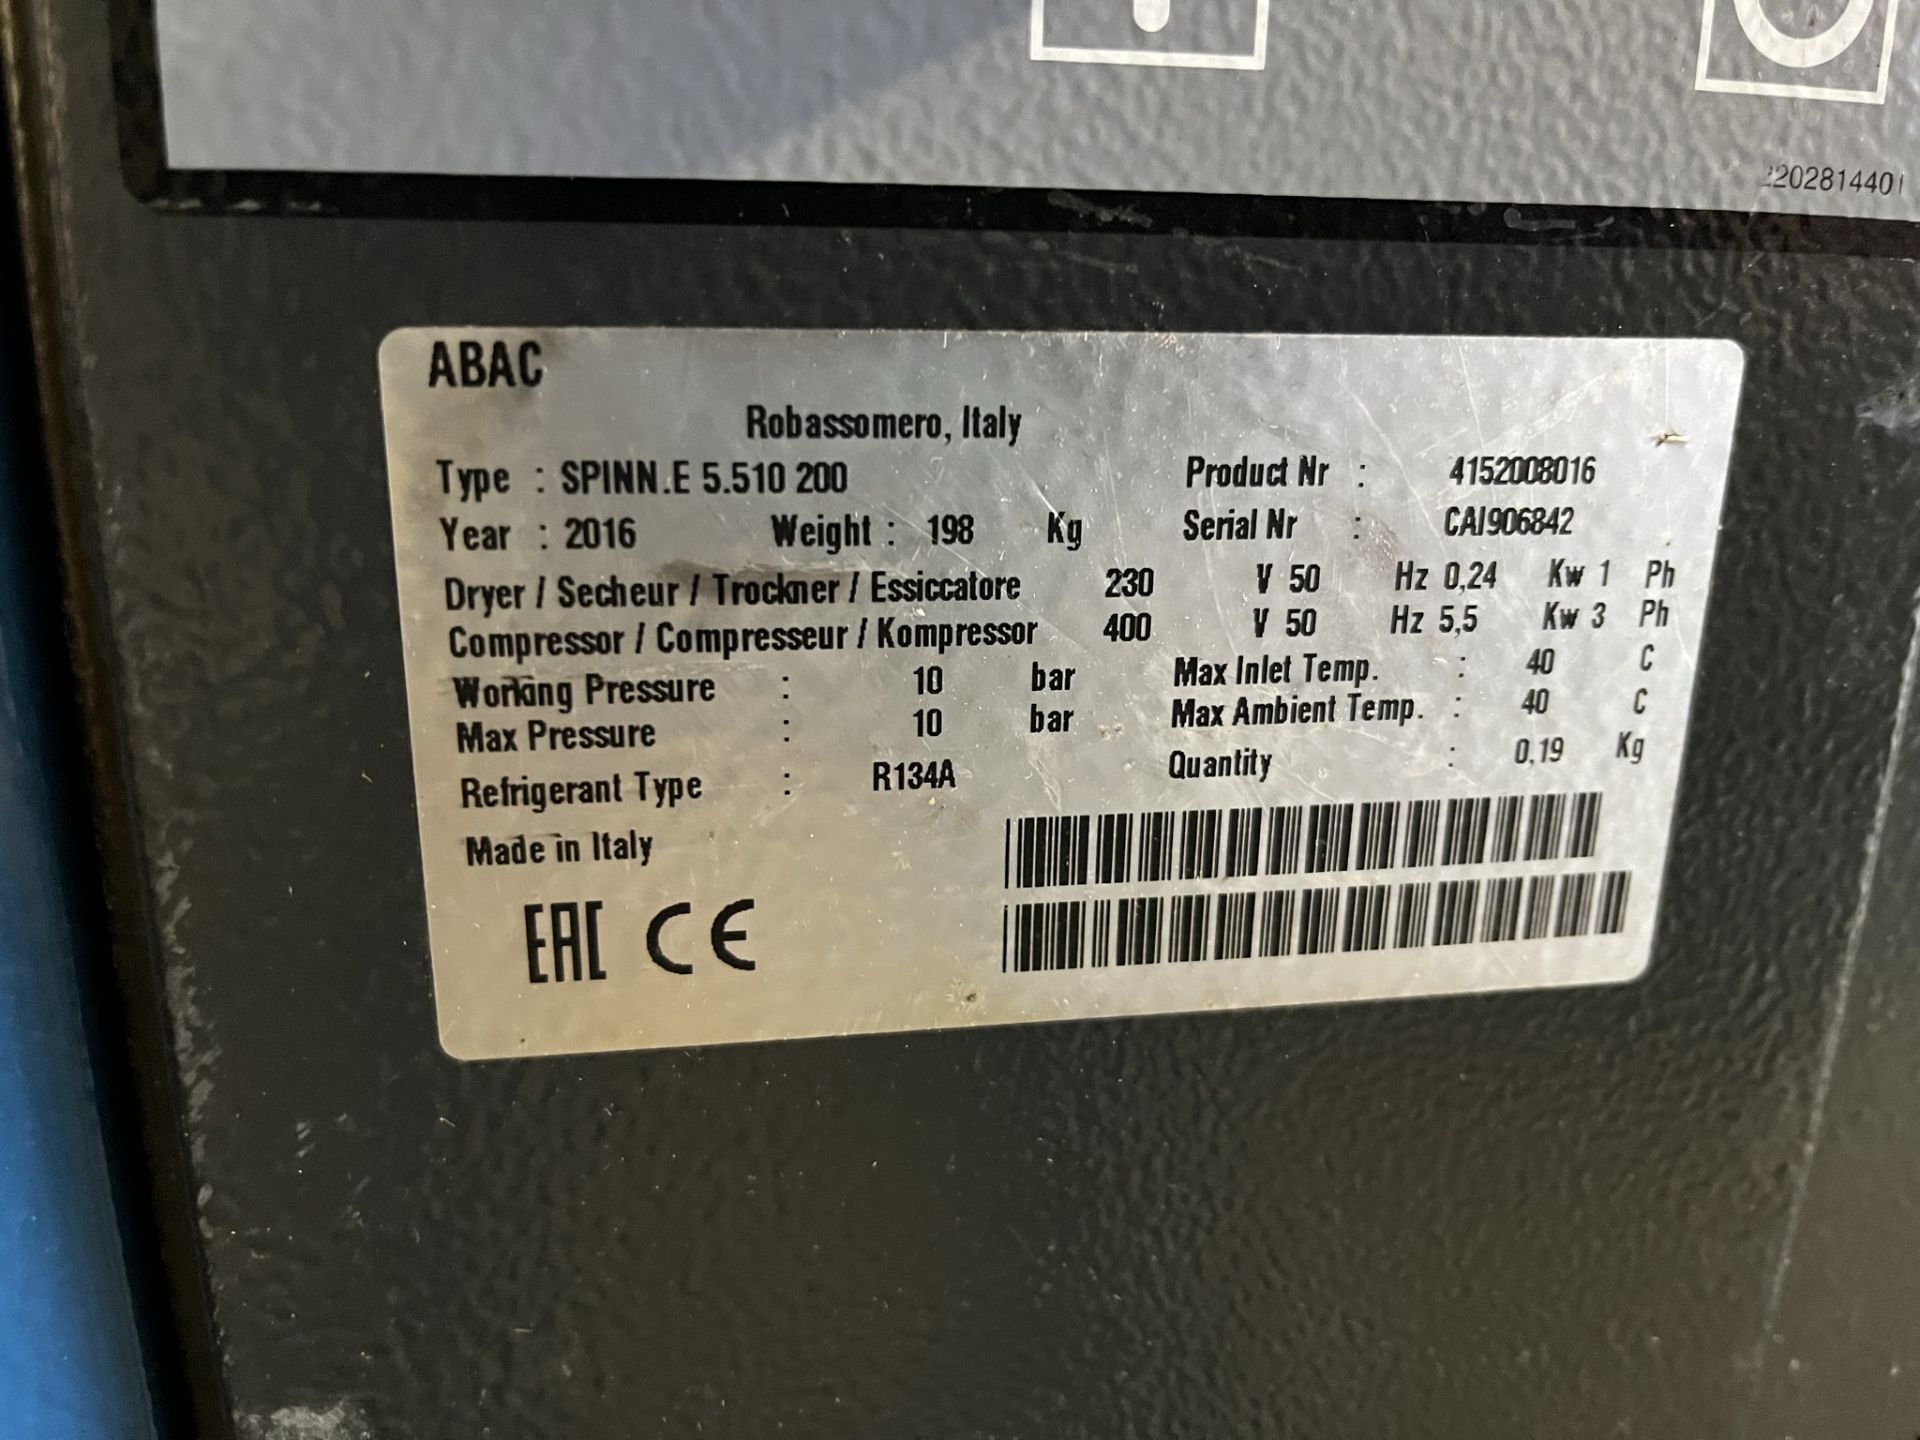 ABAC Spinn.ES.510 200 Receiver mounted packaged air compressor 2016 - Image 2 of 4